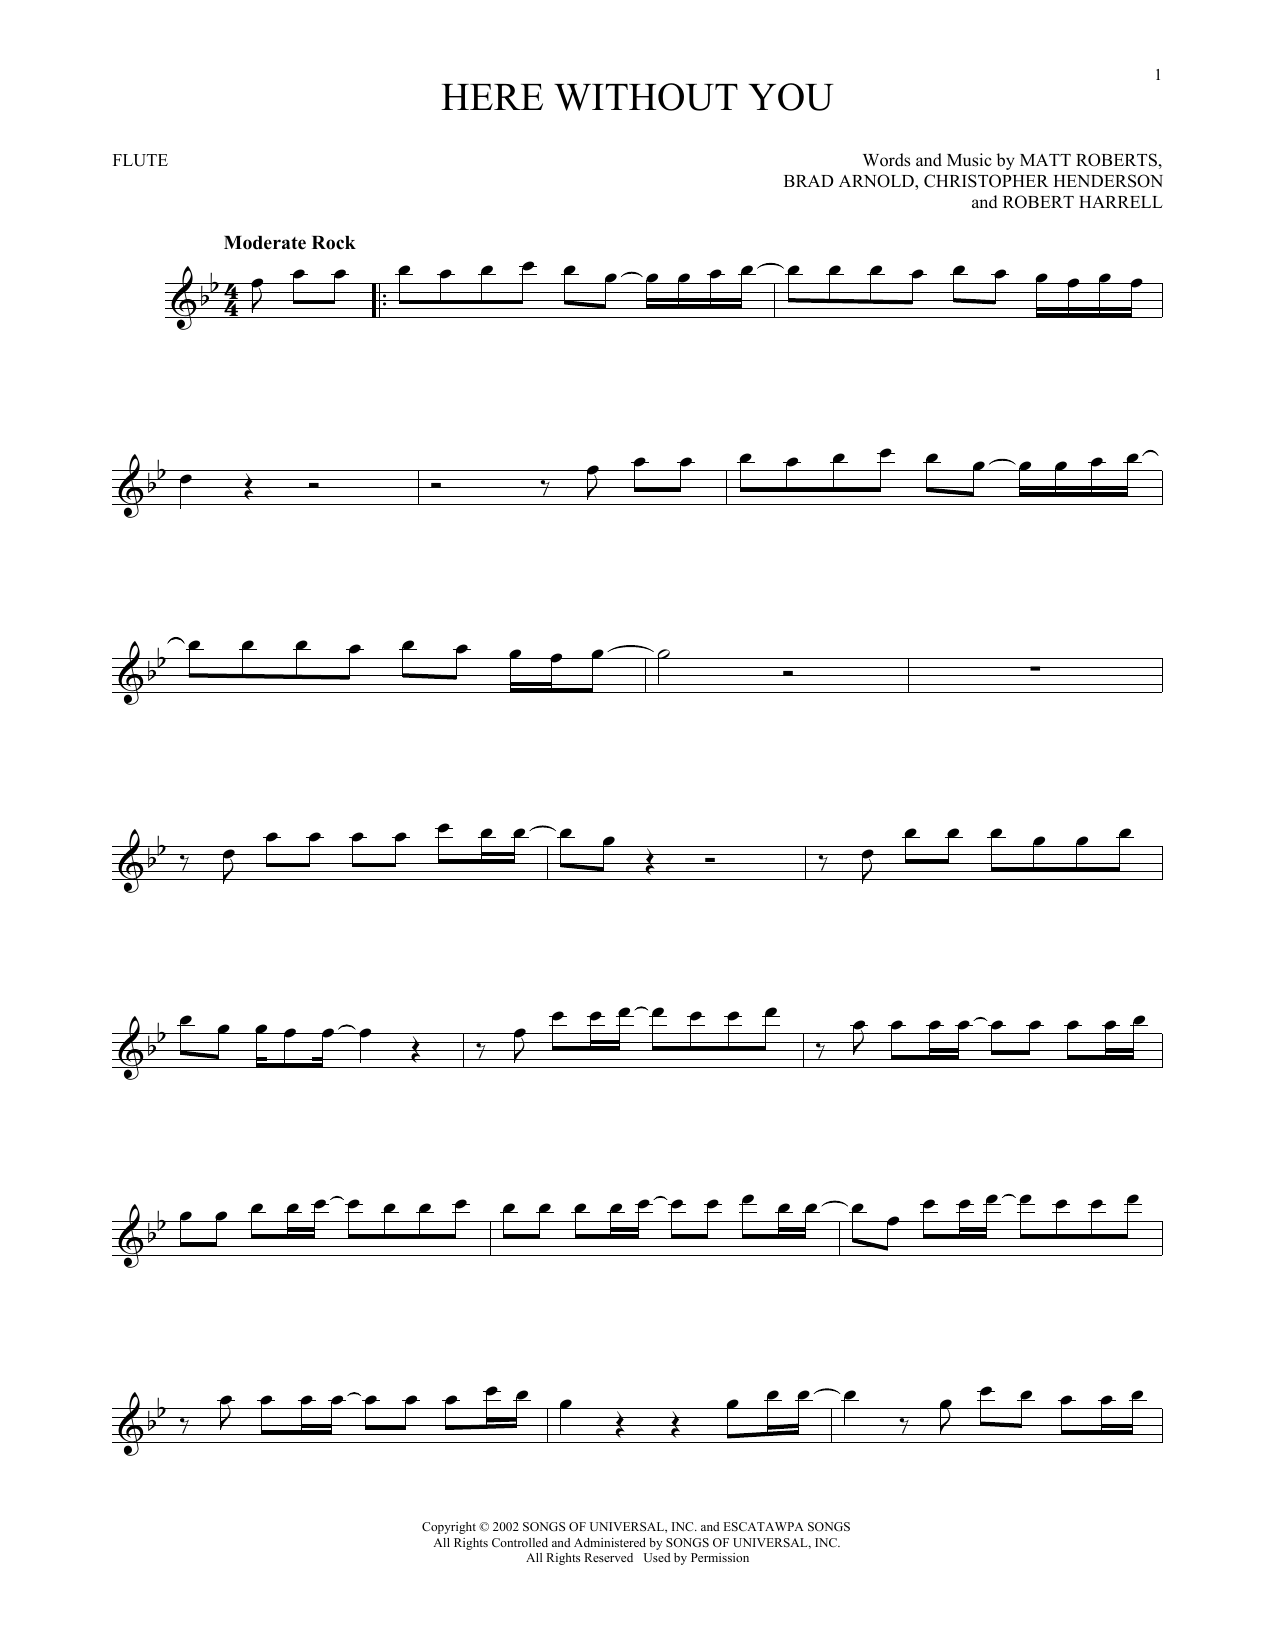 Download 3 Doors Down Here Without You Sheet Music